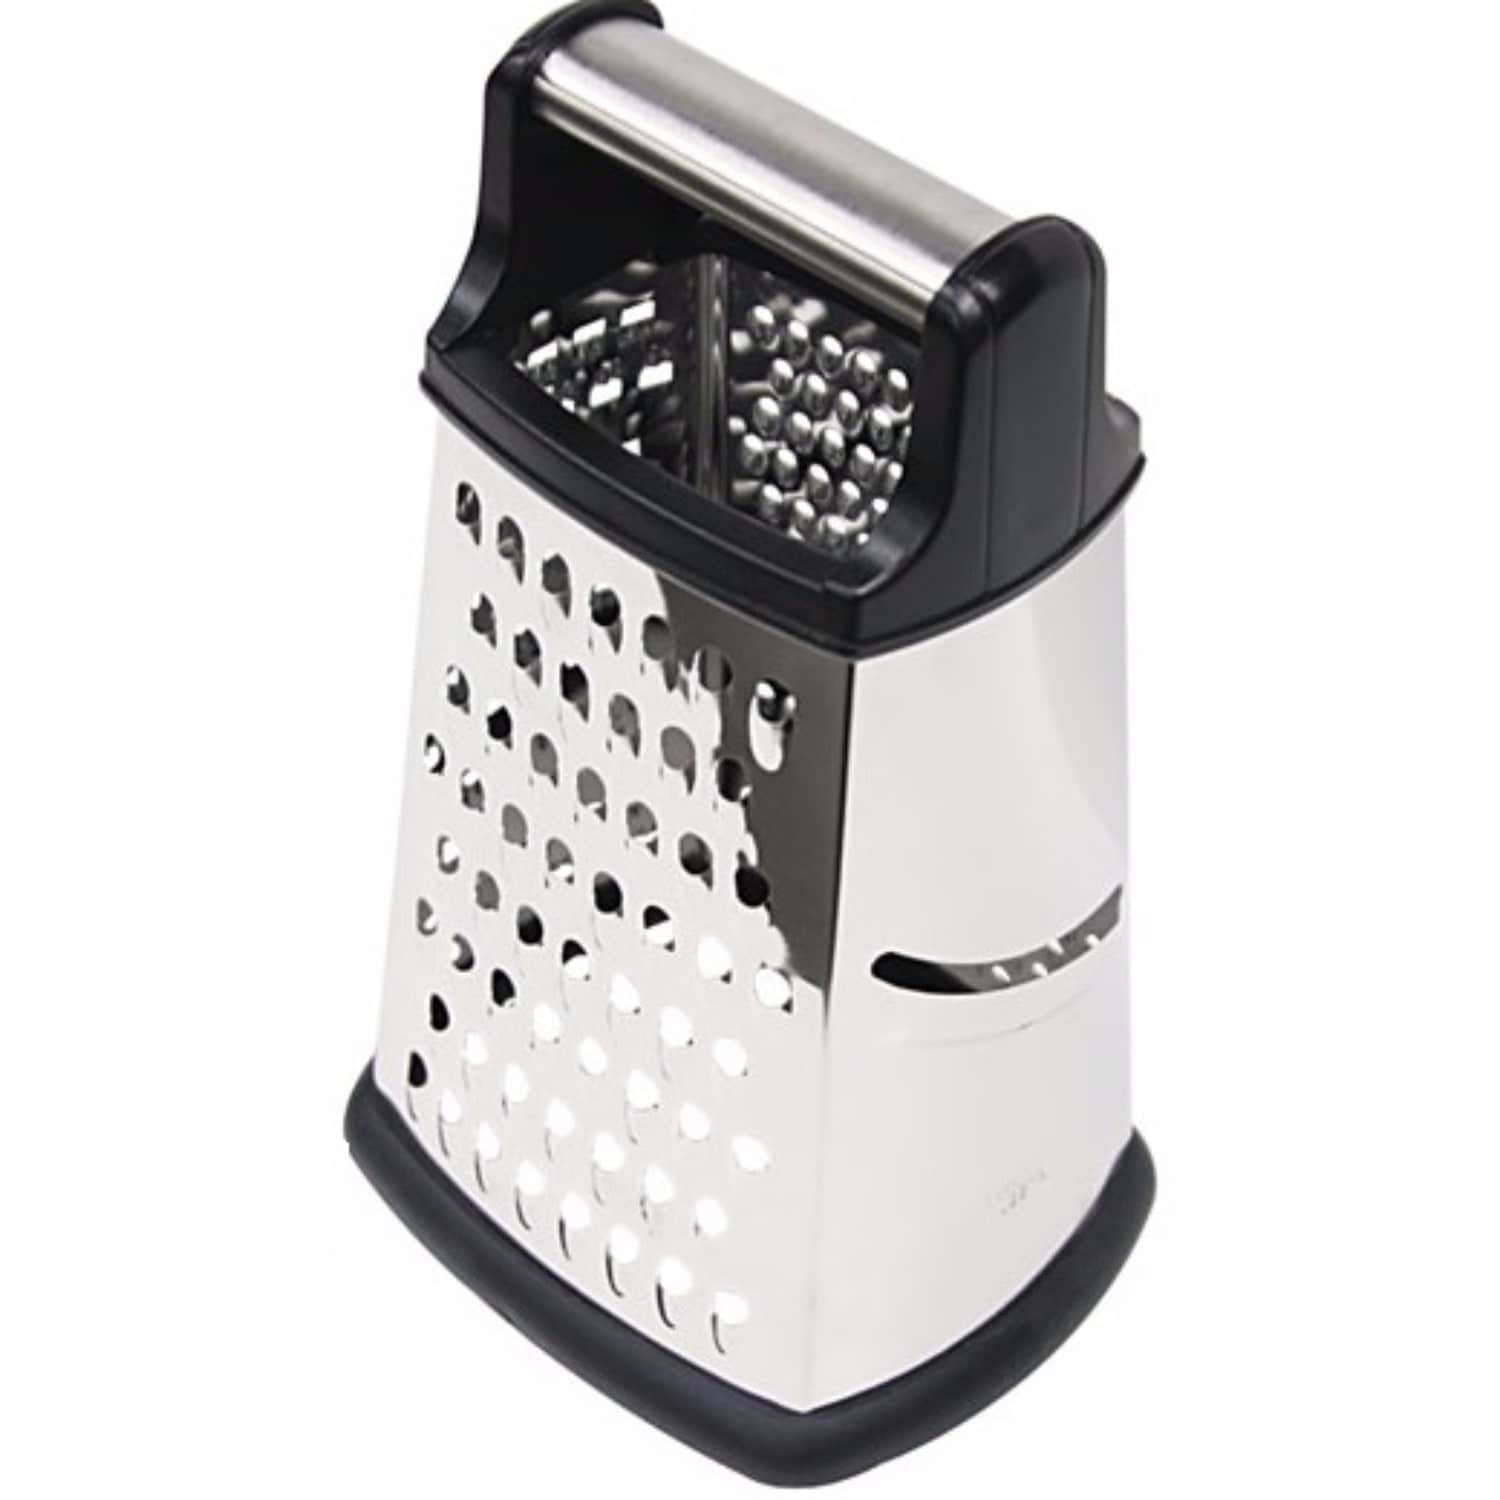 CXDa Cabbage Slicer Shredding Wide Application Practical Four-side Potato  Cheese Grater Vegetable Cutter 